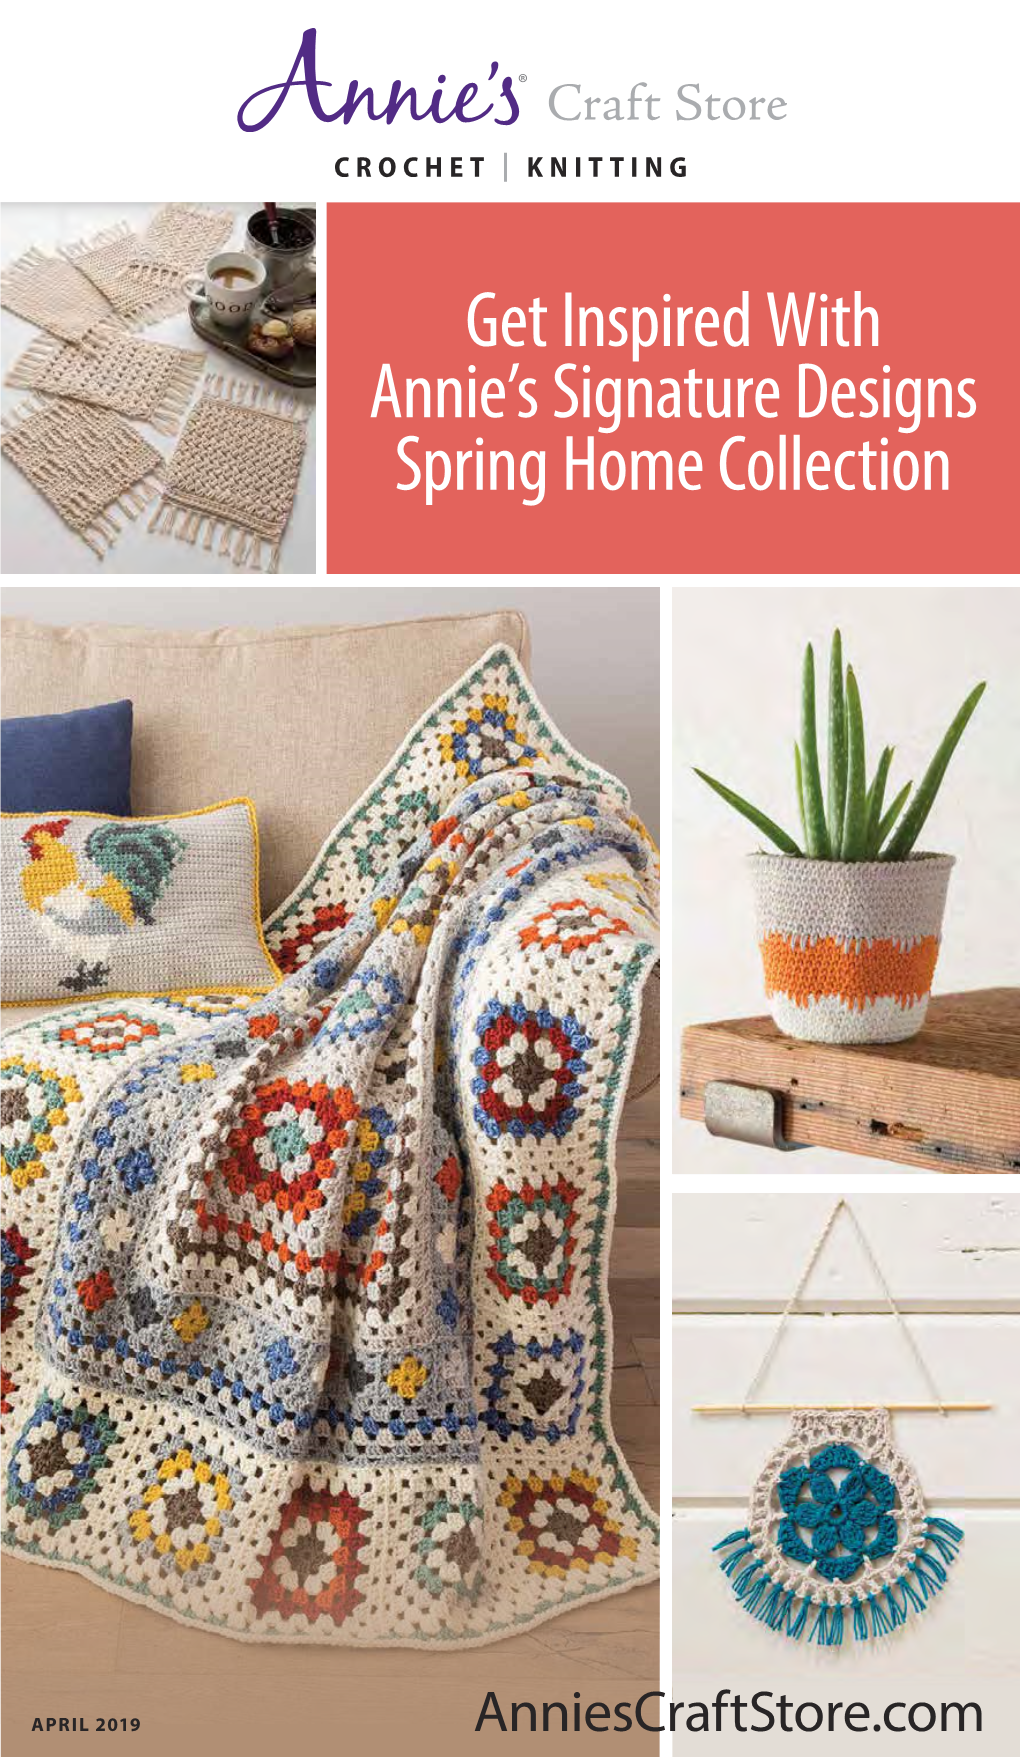 Get Inspired with Annie's Signature Designs Spring Home Collection